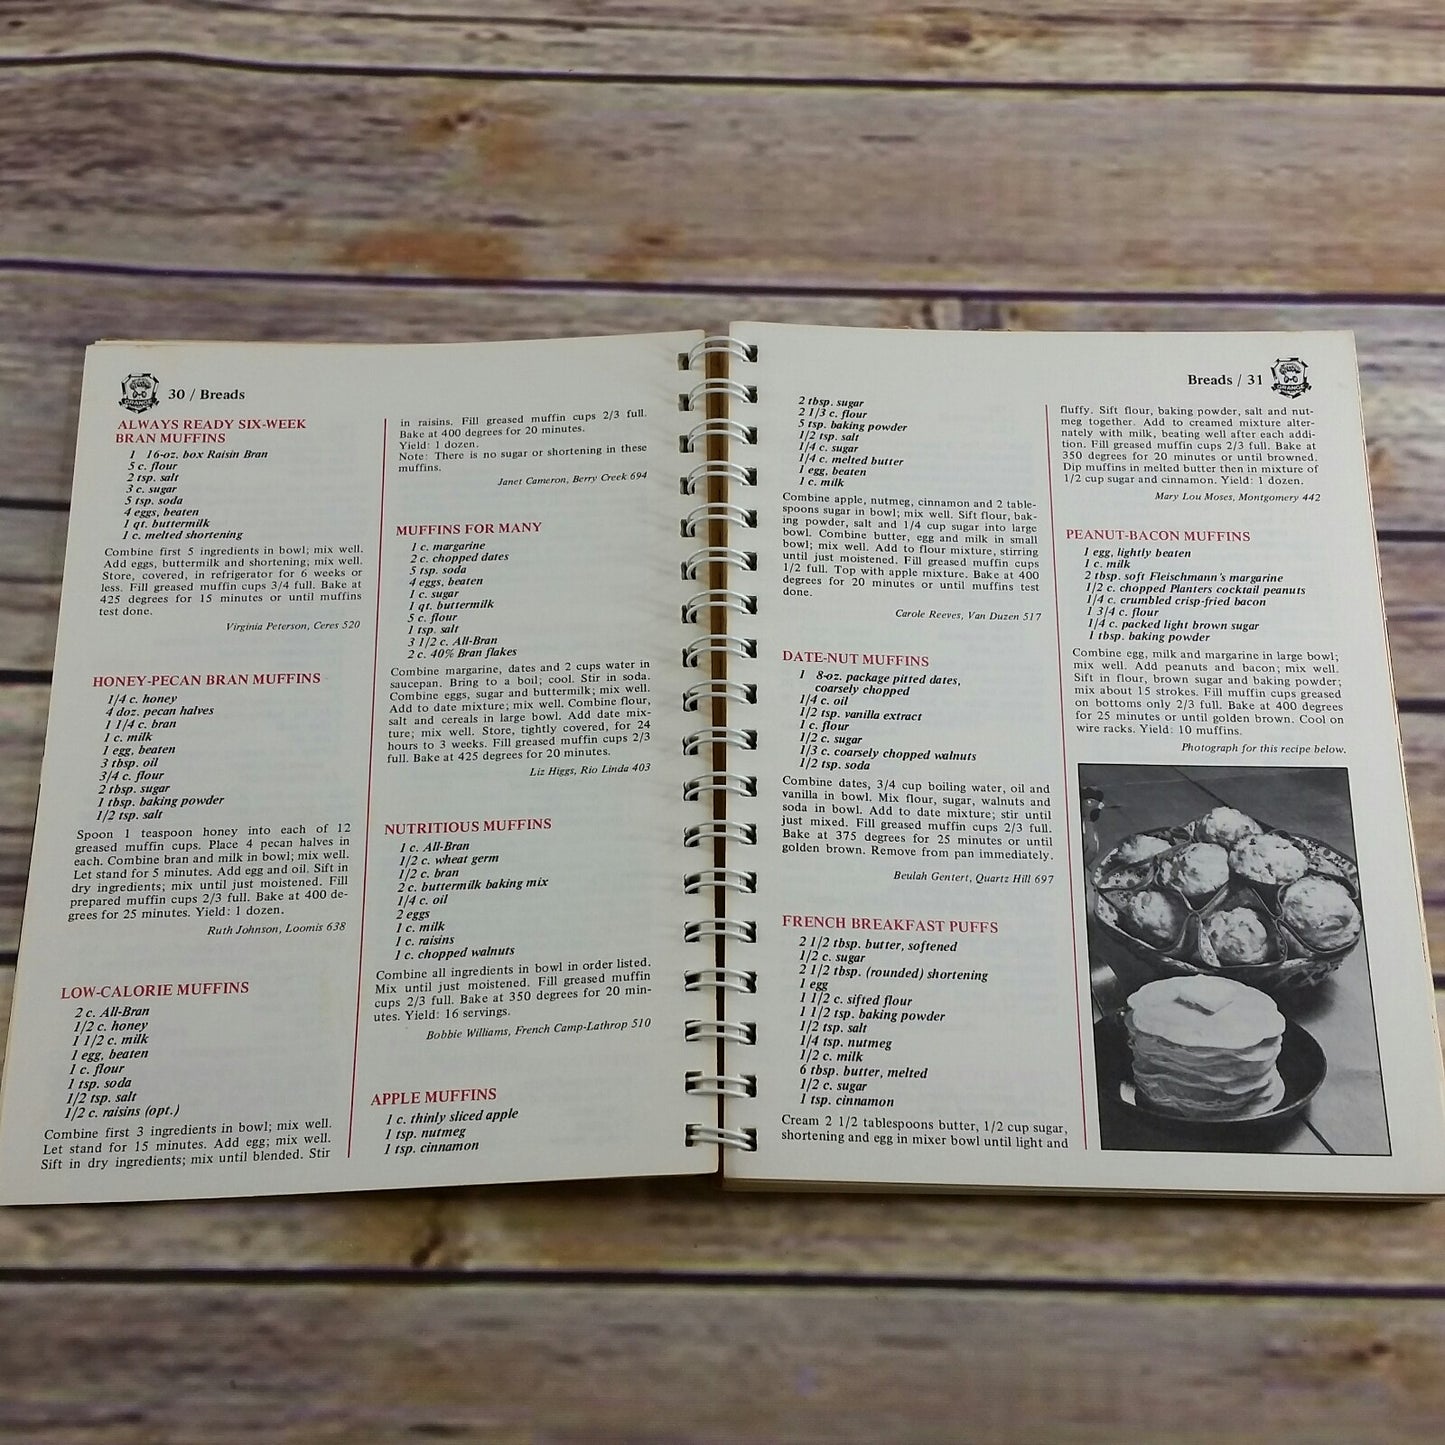 Vintage California Cookbook State Grange Recipes Are Naturally Good Eating 1985 Spiral Bound Paperback